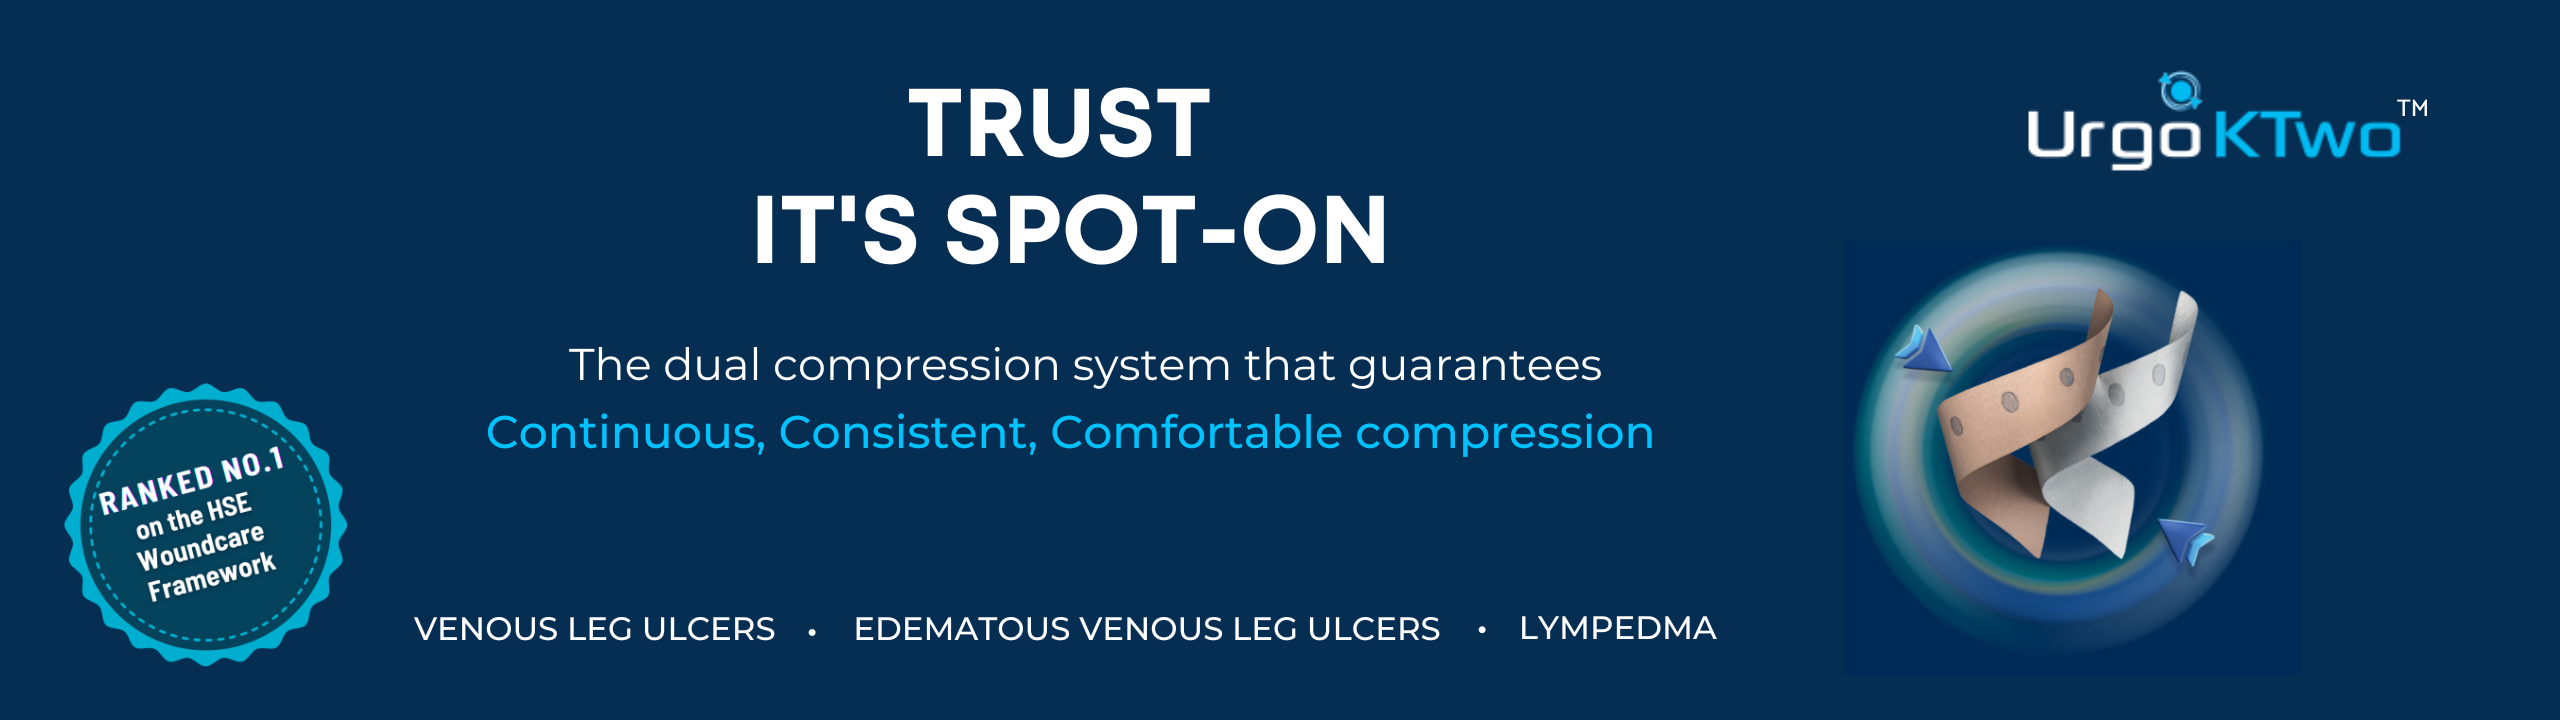 The dual compression system that guarantees